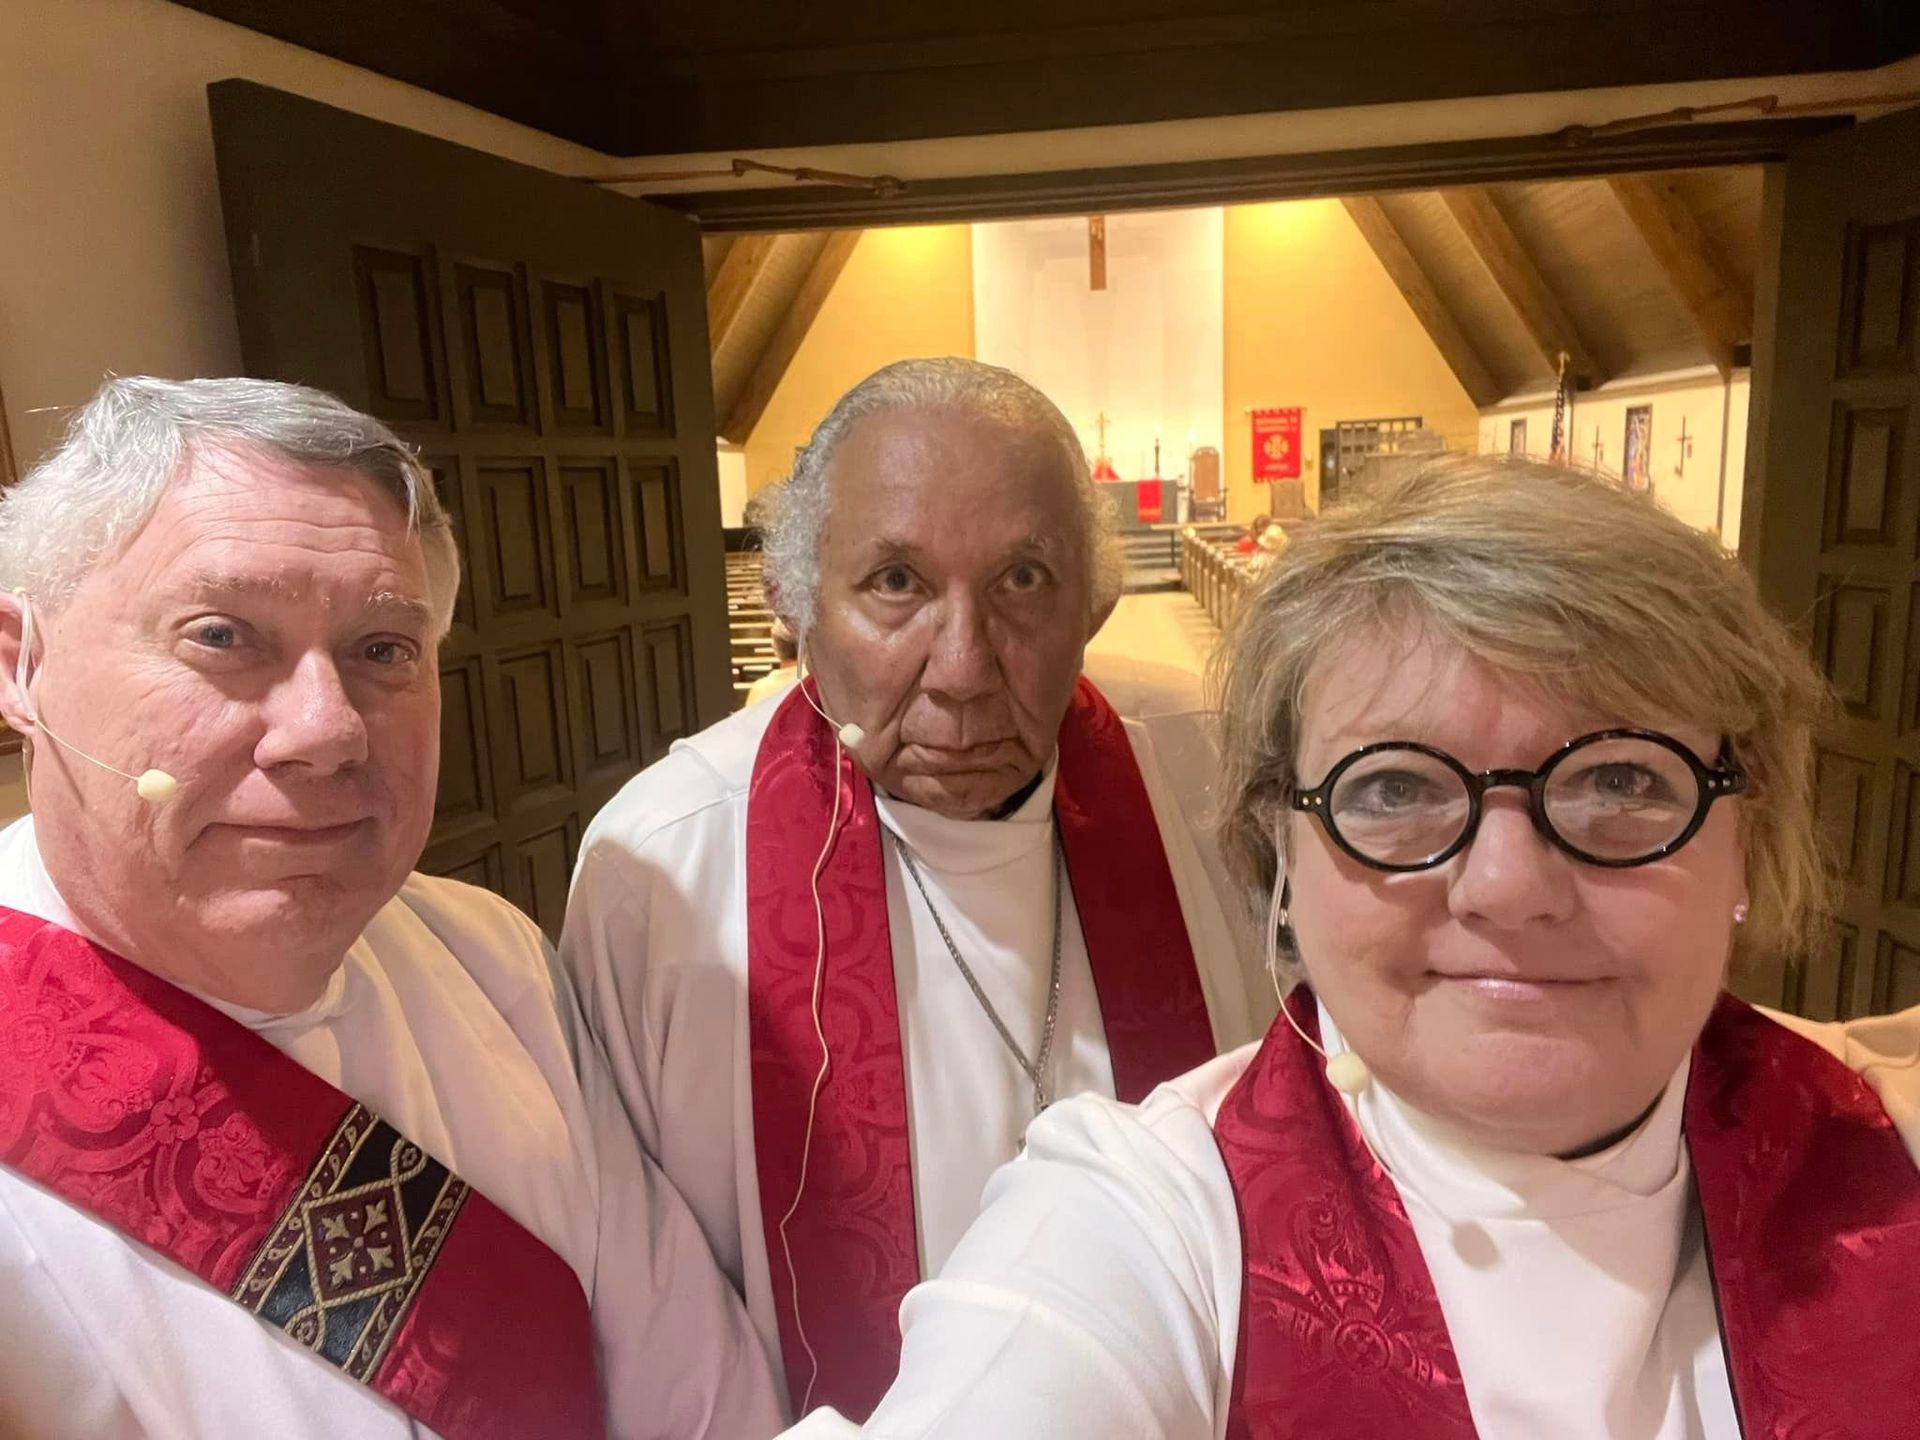 two men and a woman pose for a picture in a church